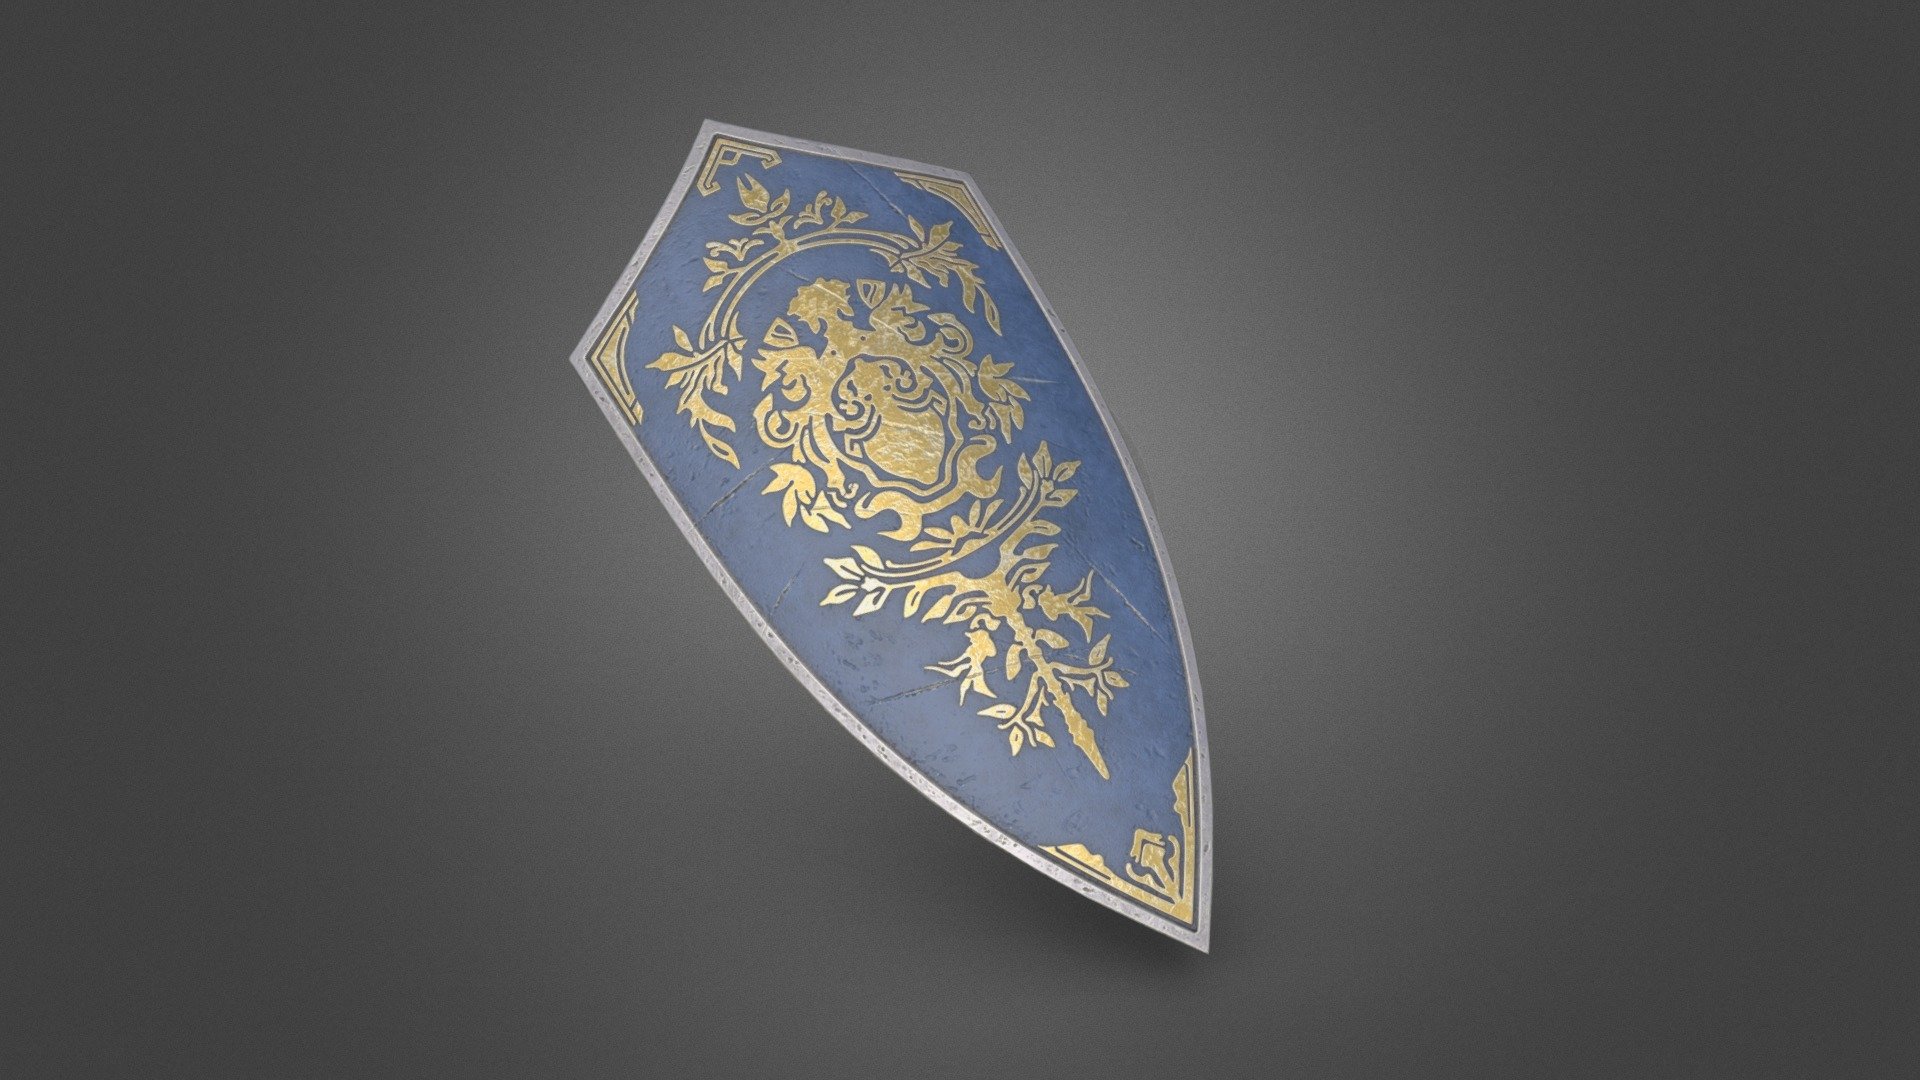 Crest Shield from Dark souls.
Modeled in 3dsmax and ZBrush, Baked in Marmoset TB, Textured in Substance Painter - FanArt - DarkSouls - Crest Shield - 3D model by Healik 3d model